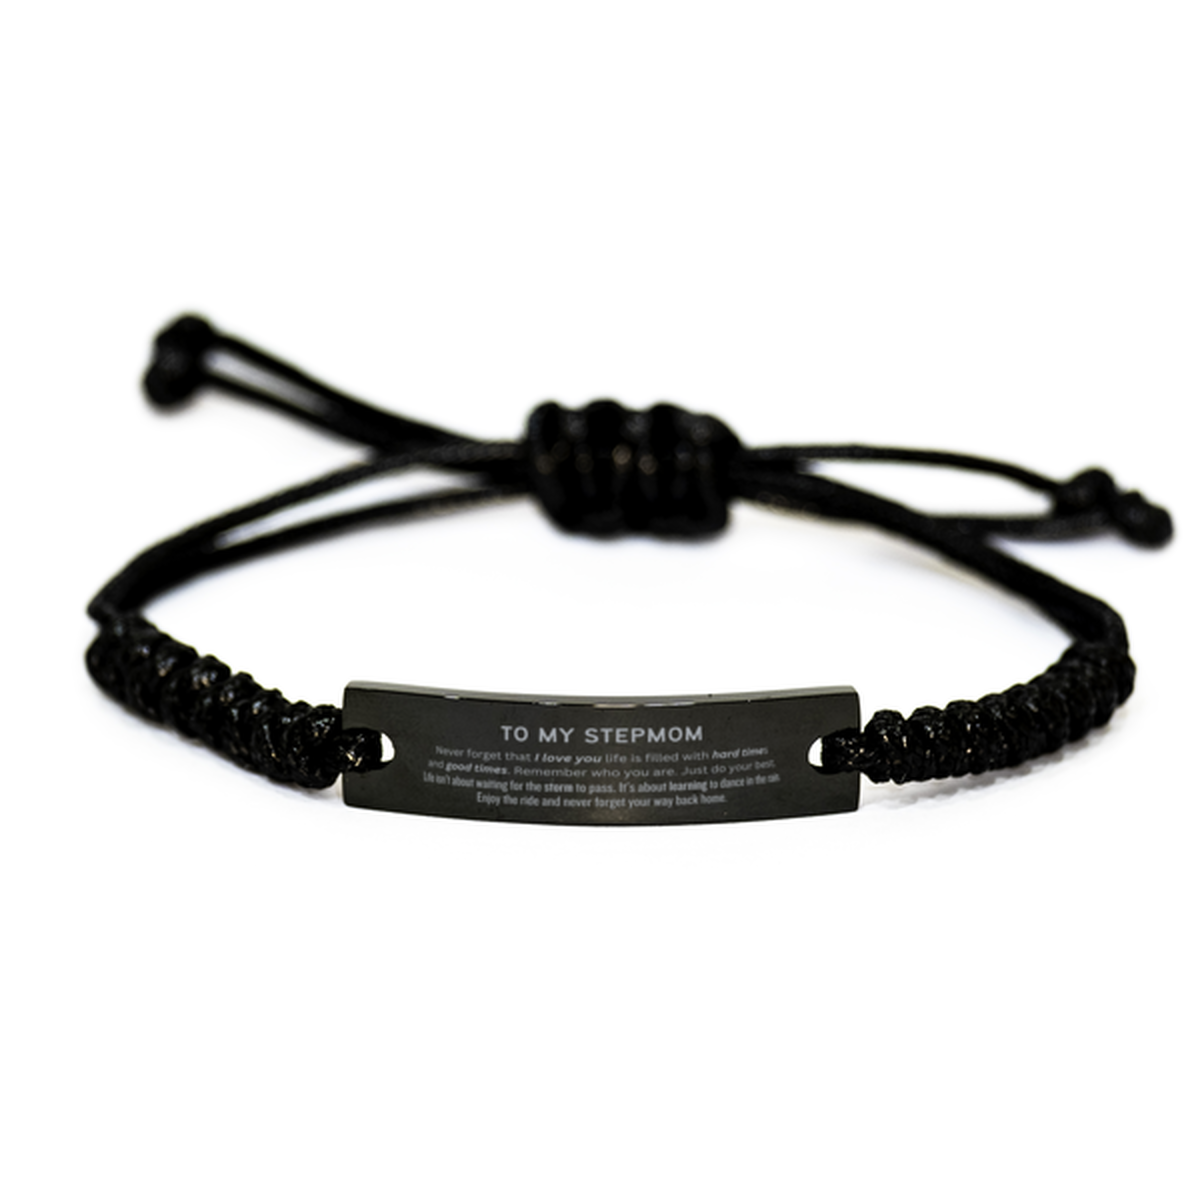 Christmas Stepmom Black Rope Bracelet Gifts, To My Stepmom Birthday Thank You Gifts For Stepmom, Graduation Unique Gifts For Stepmom To My Stepmom Never forget that I love you life is filled with hard times and good times. Remember who you are. Just do yo